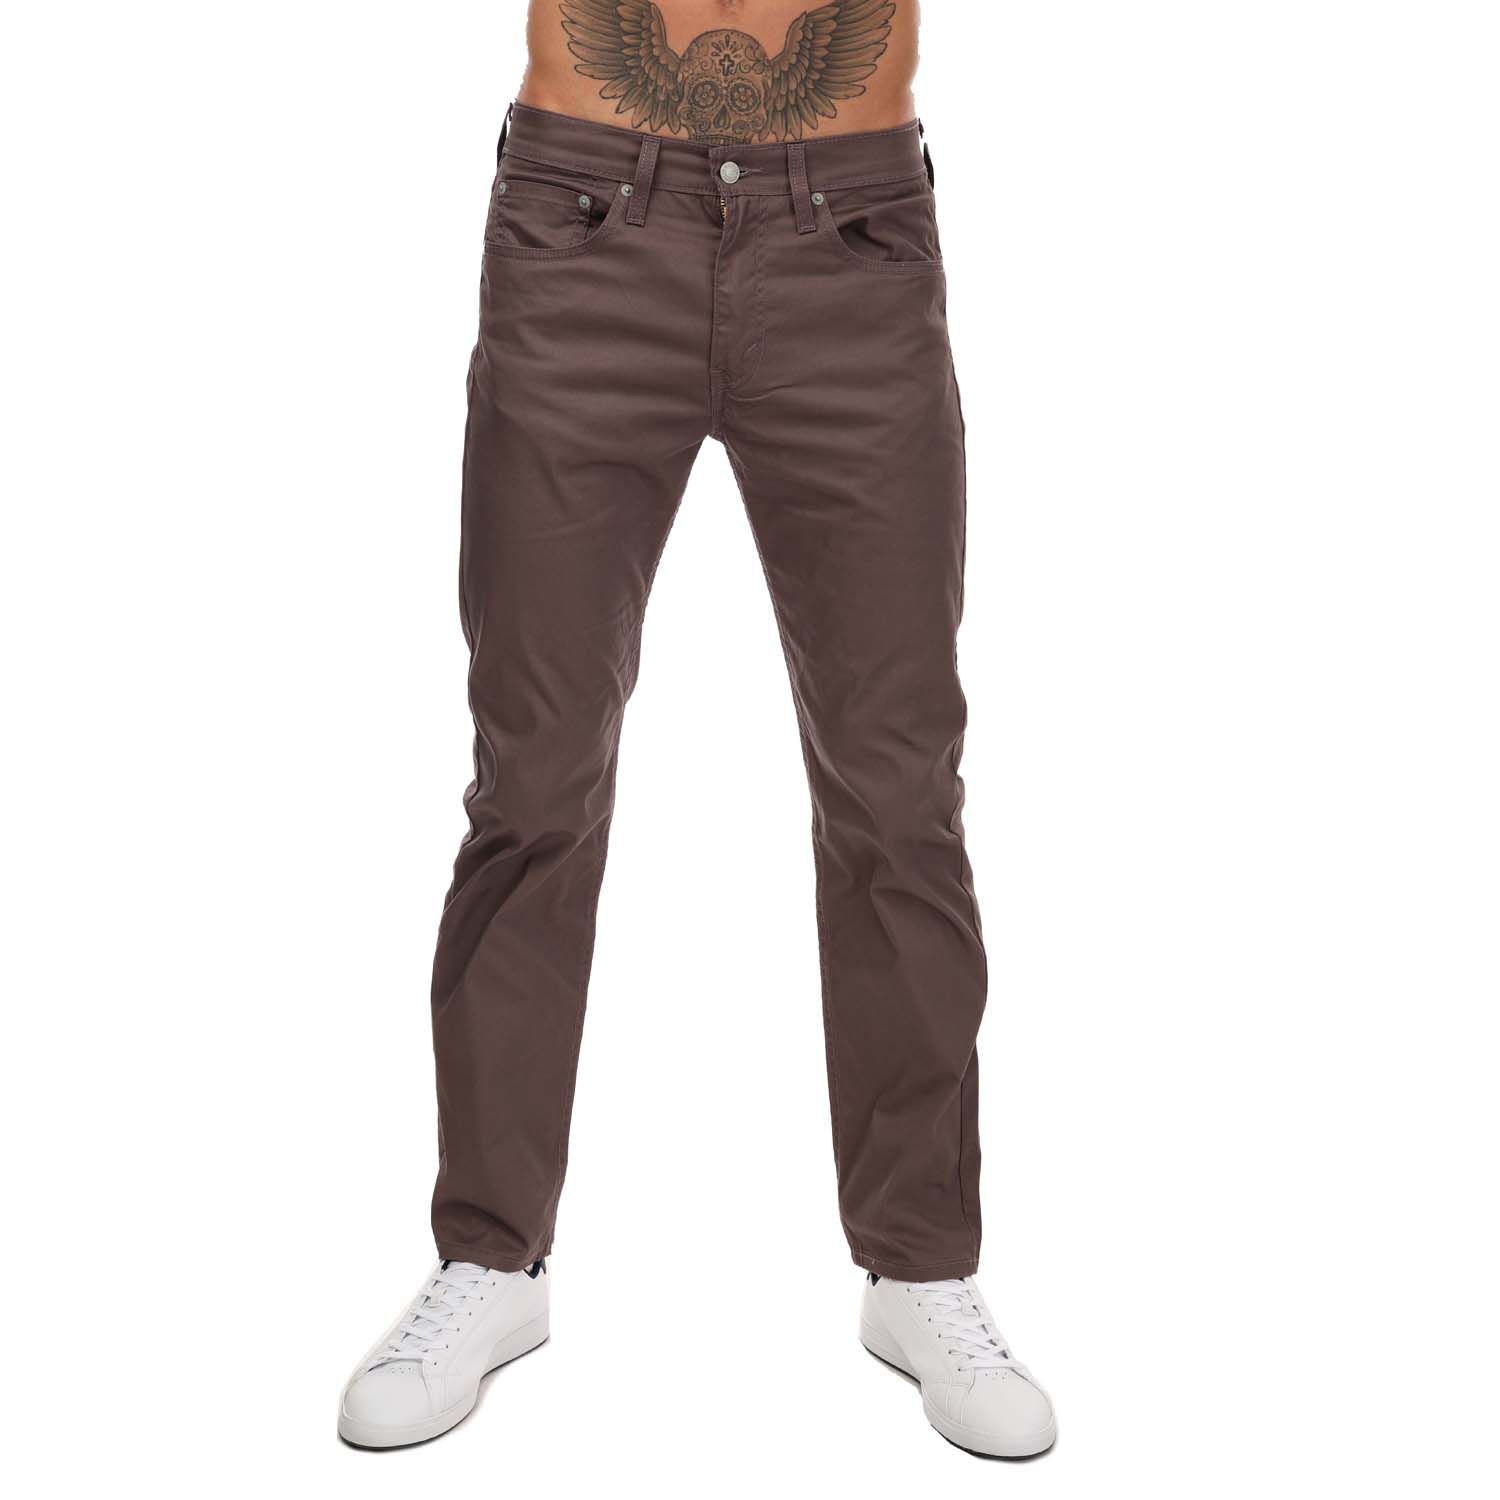 Mens 502 Tapered Jeans